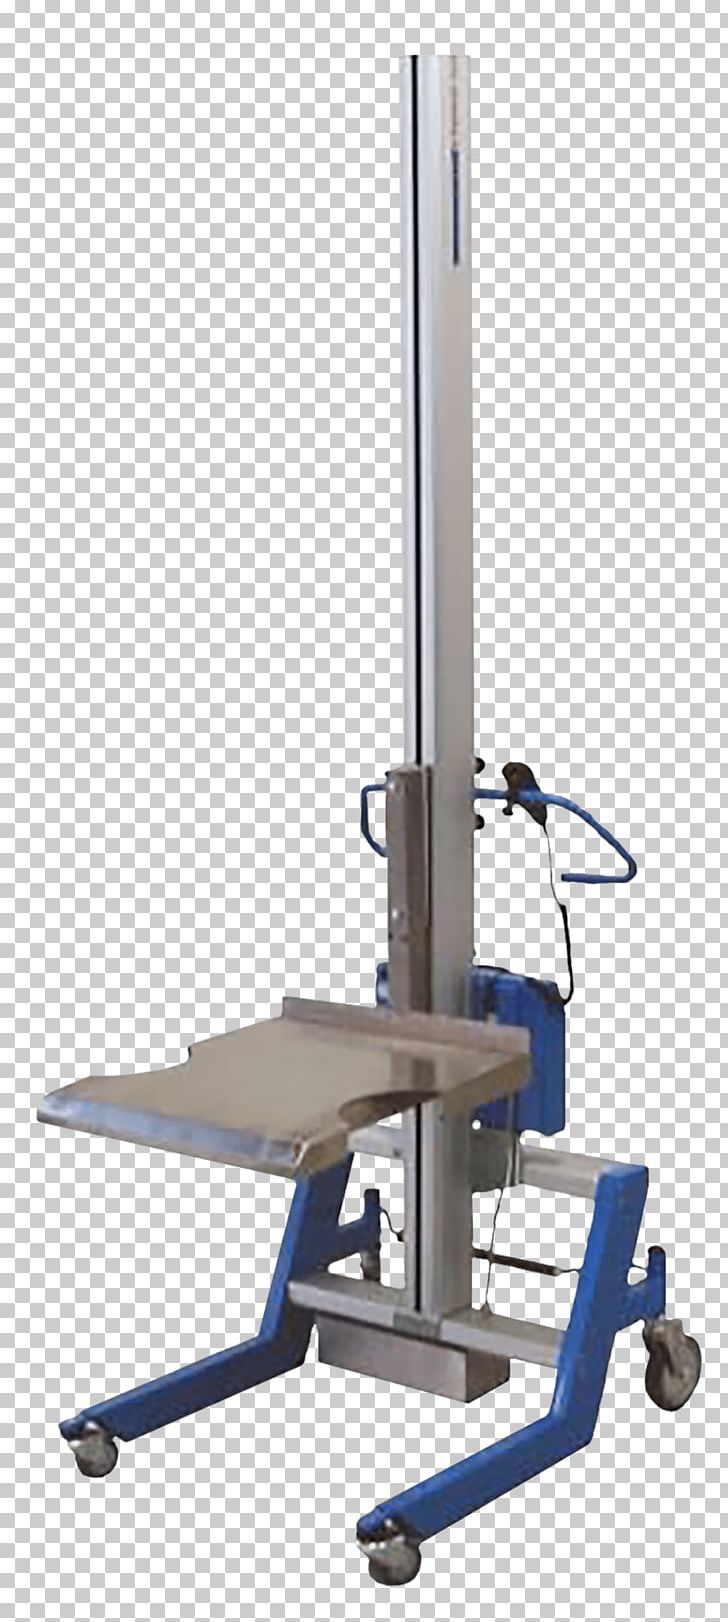 Lifting Equipment Elevator Conveyor System Material Handling Material-handling Equipment PNG, Clipart, Angle, Conveyor System, Crane, Elevator, Hardware Free PNG Download